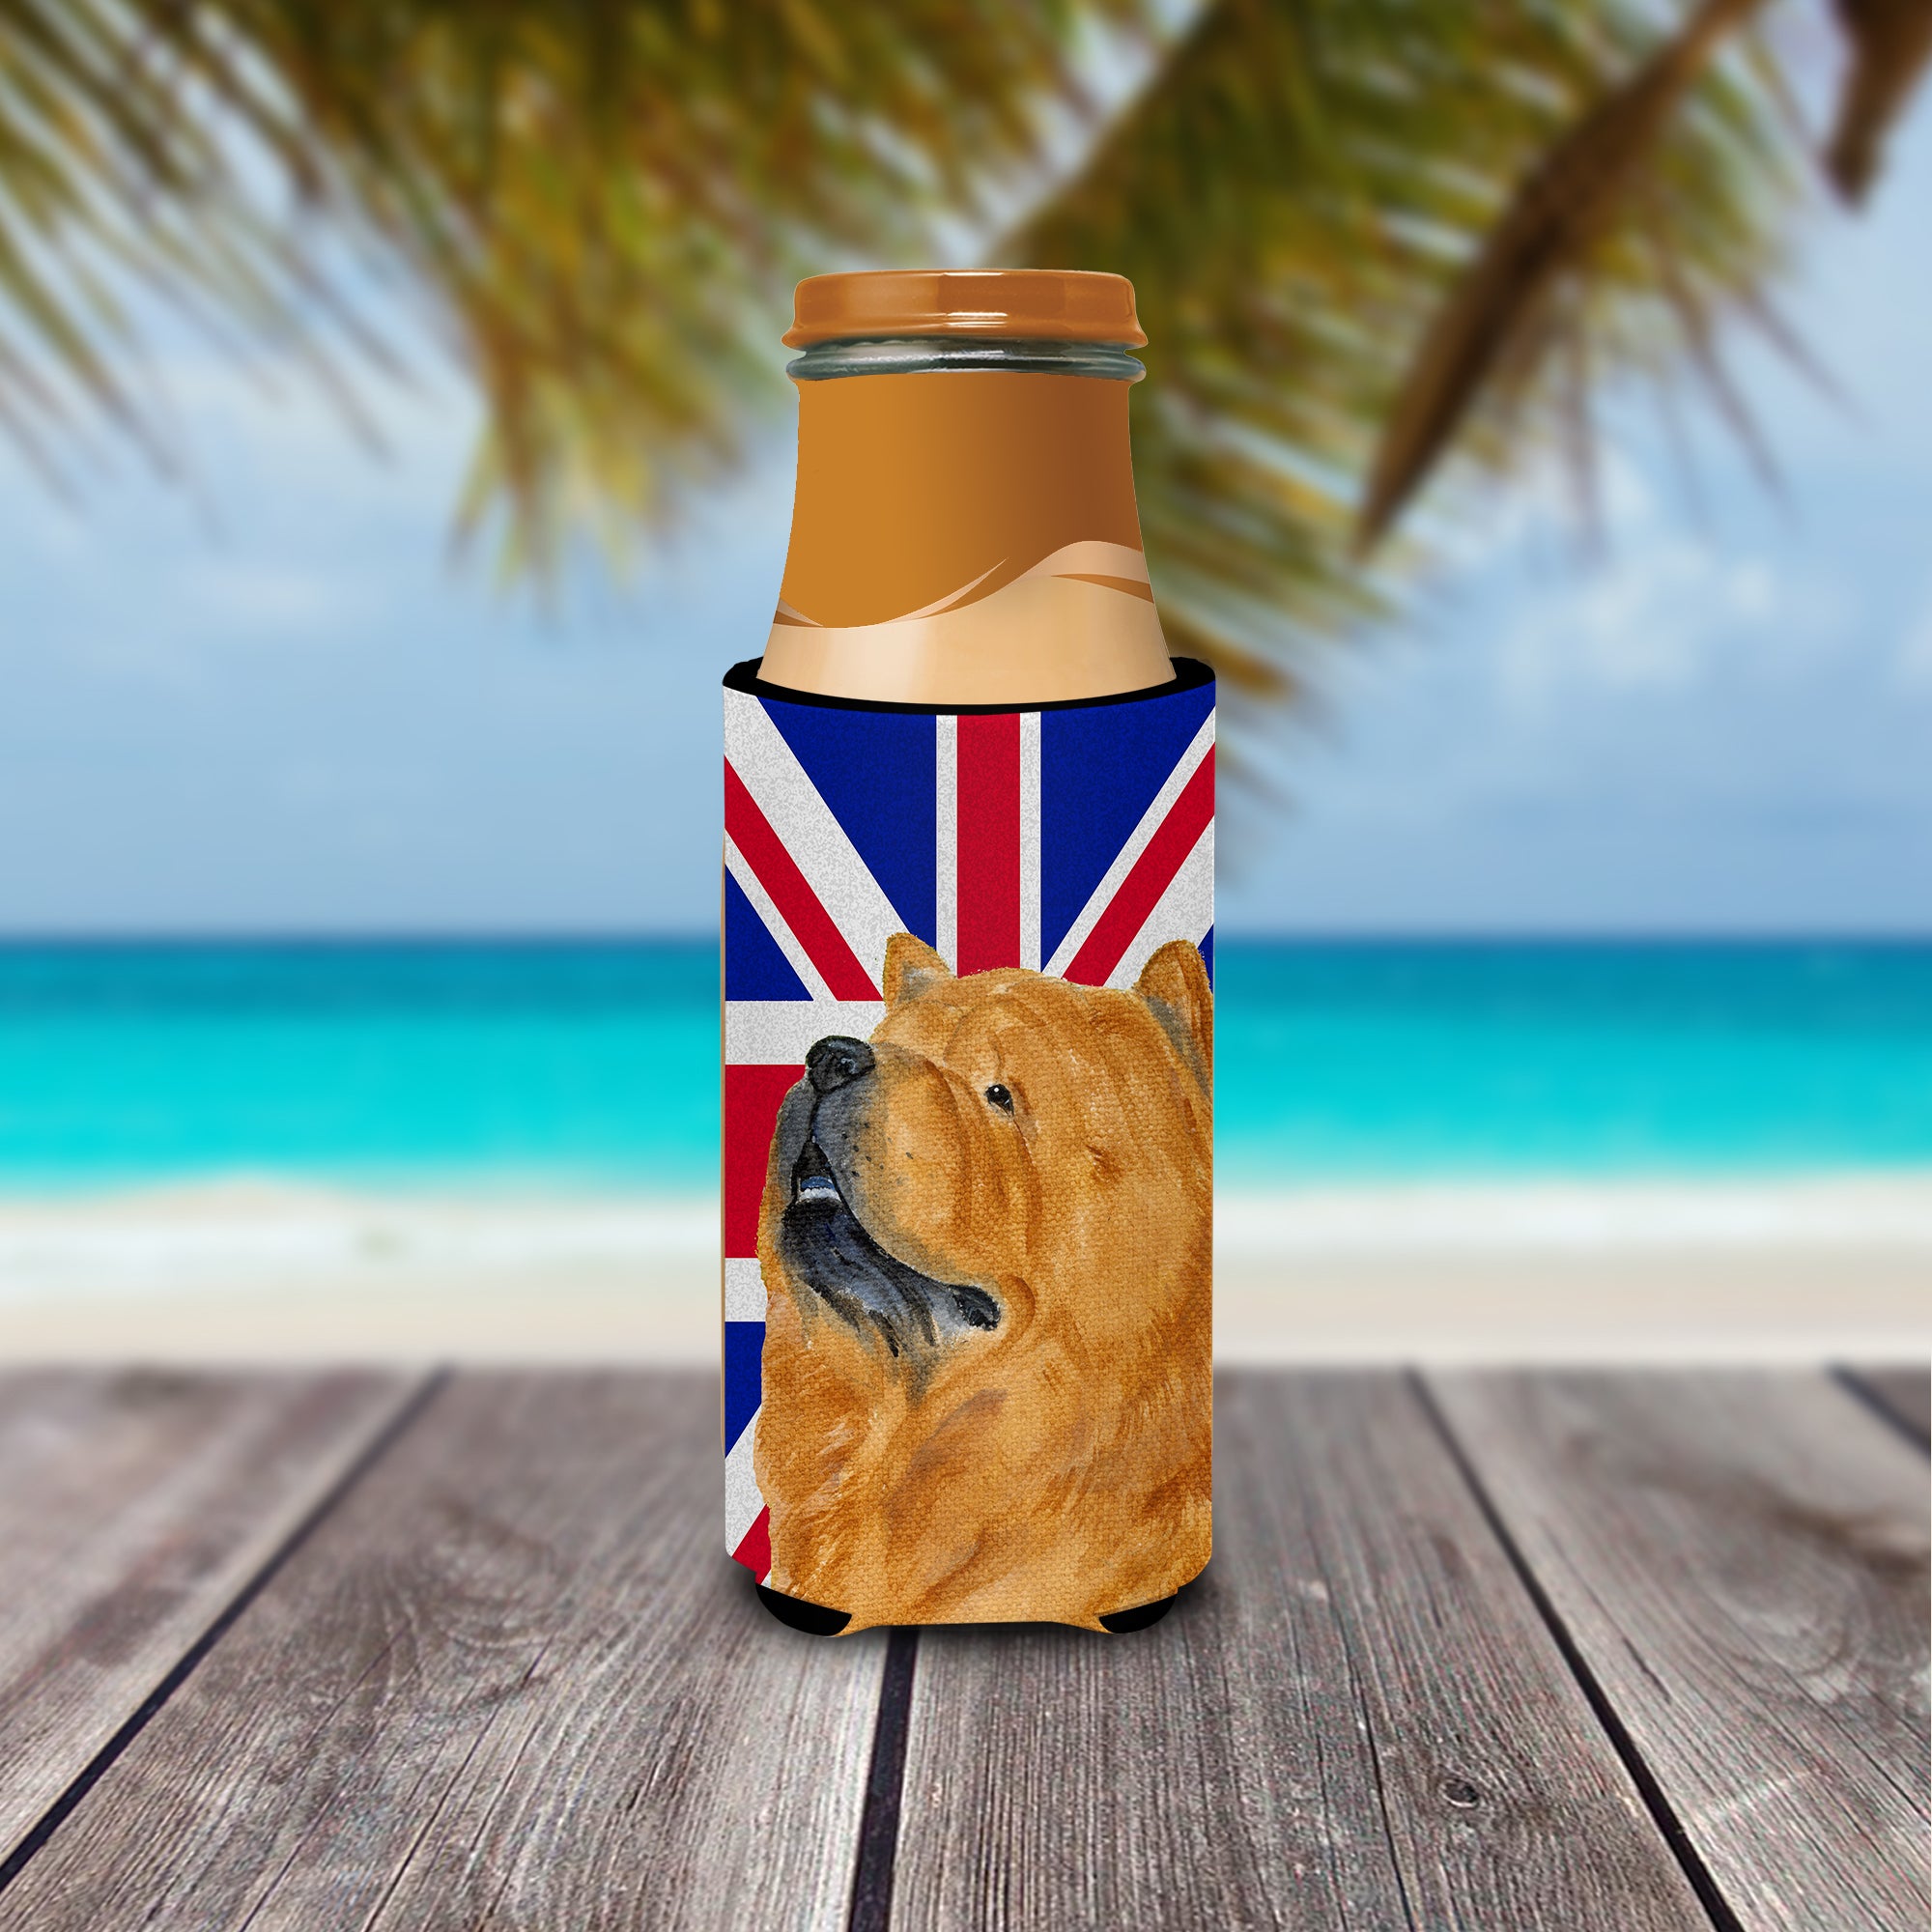 Chow Chow with English Union Jack British Flag Ultra Beverage Insulators for slim cans SS4944MUK